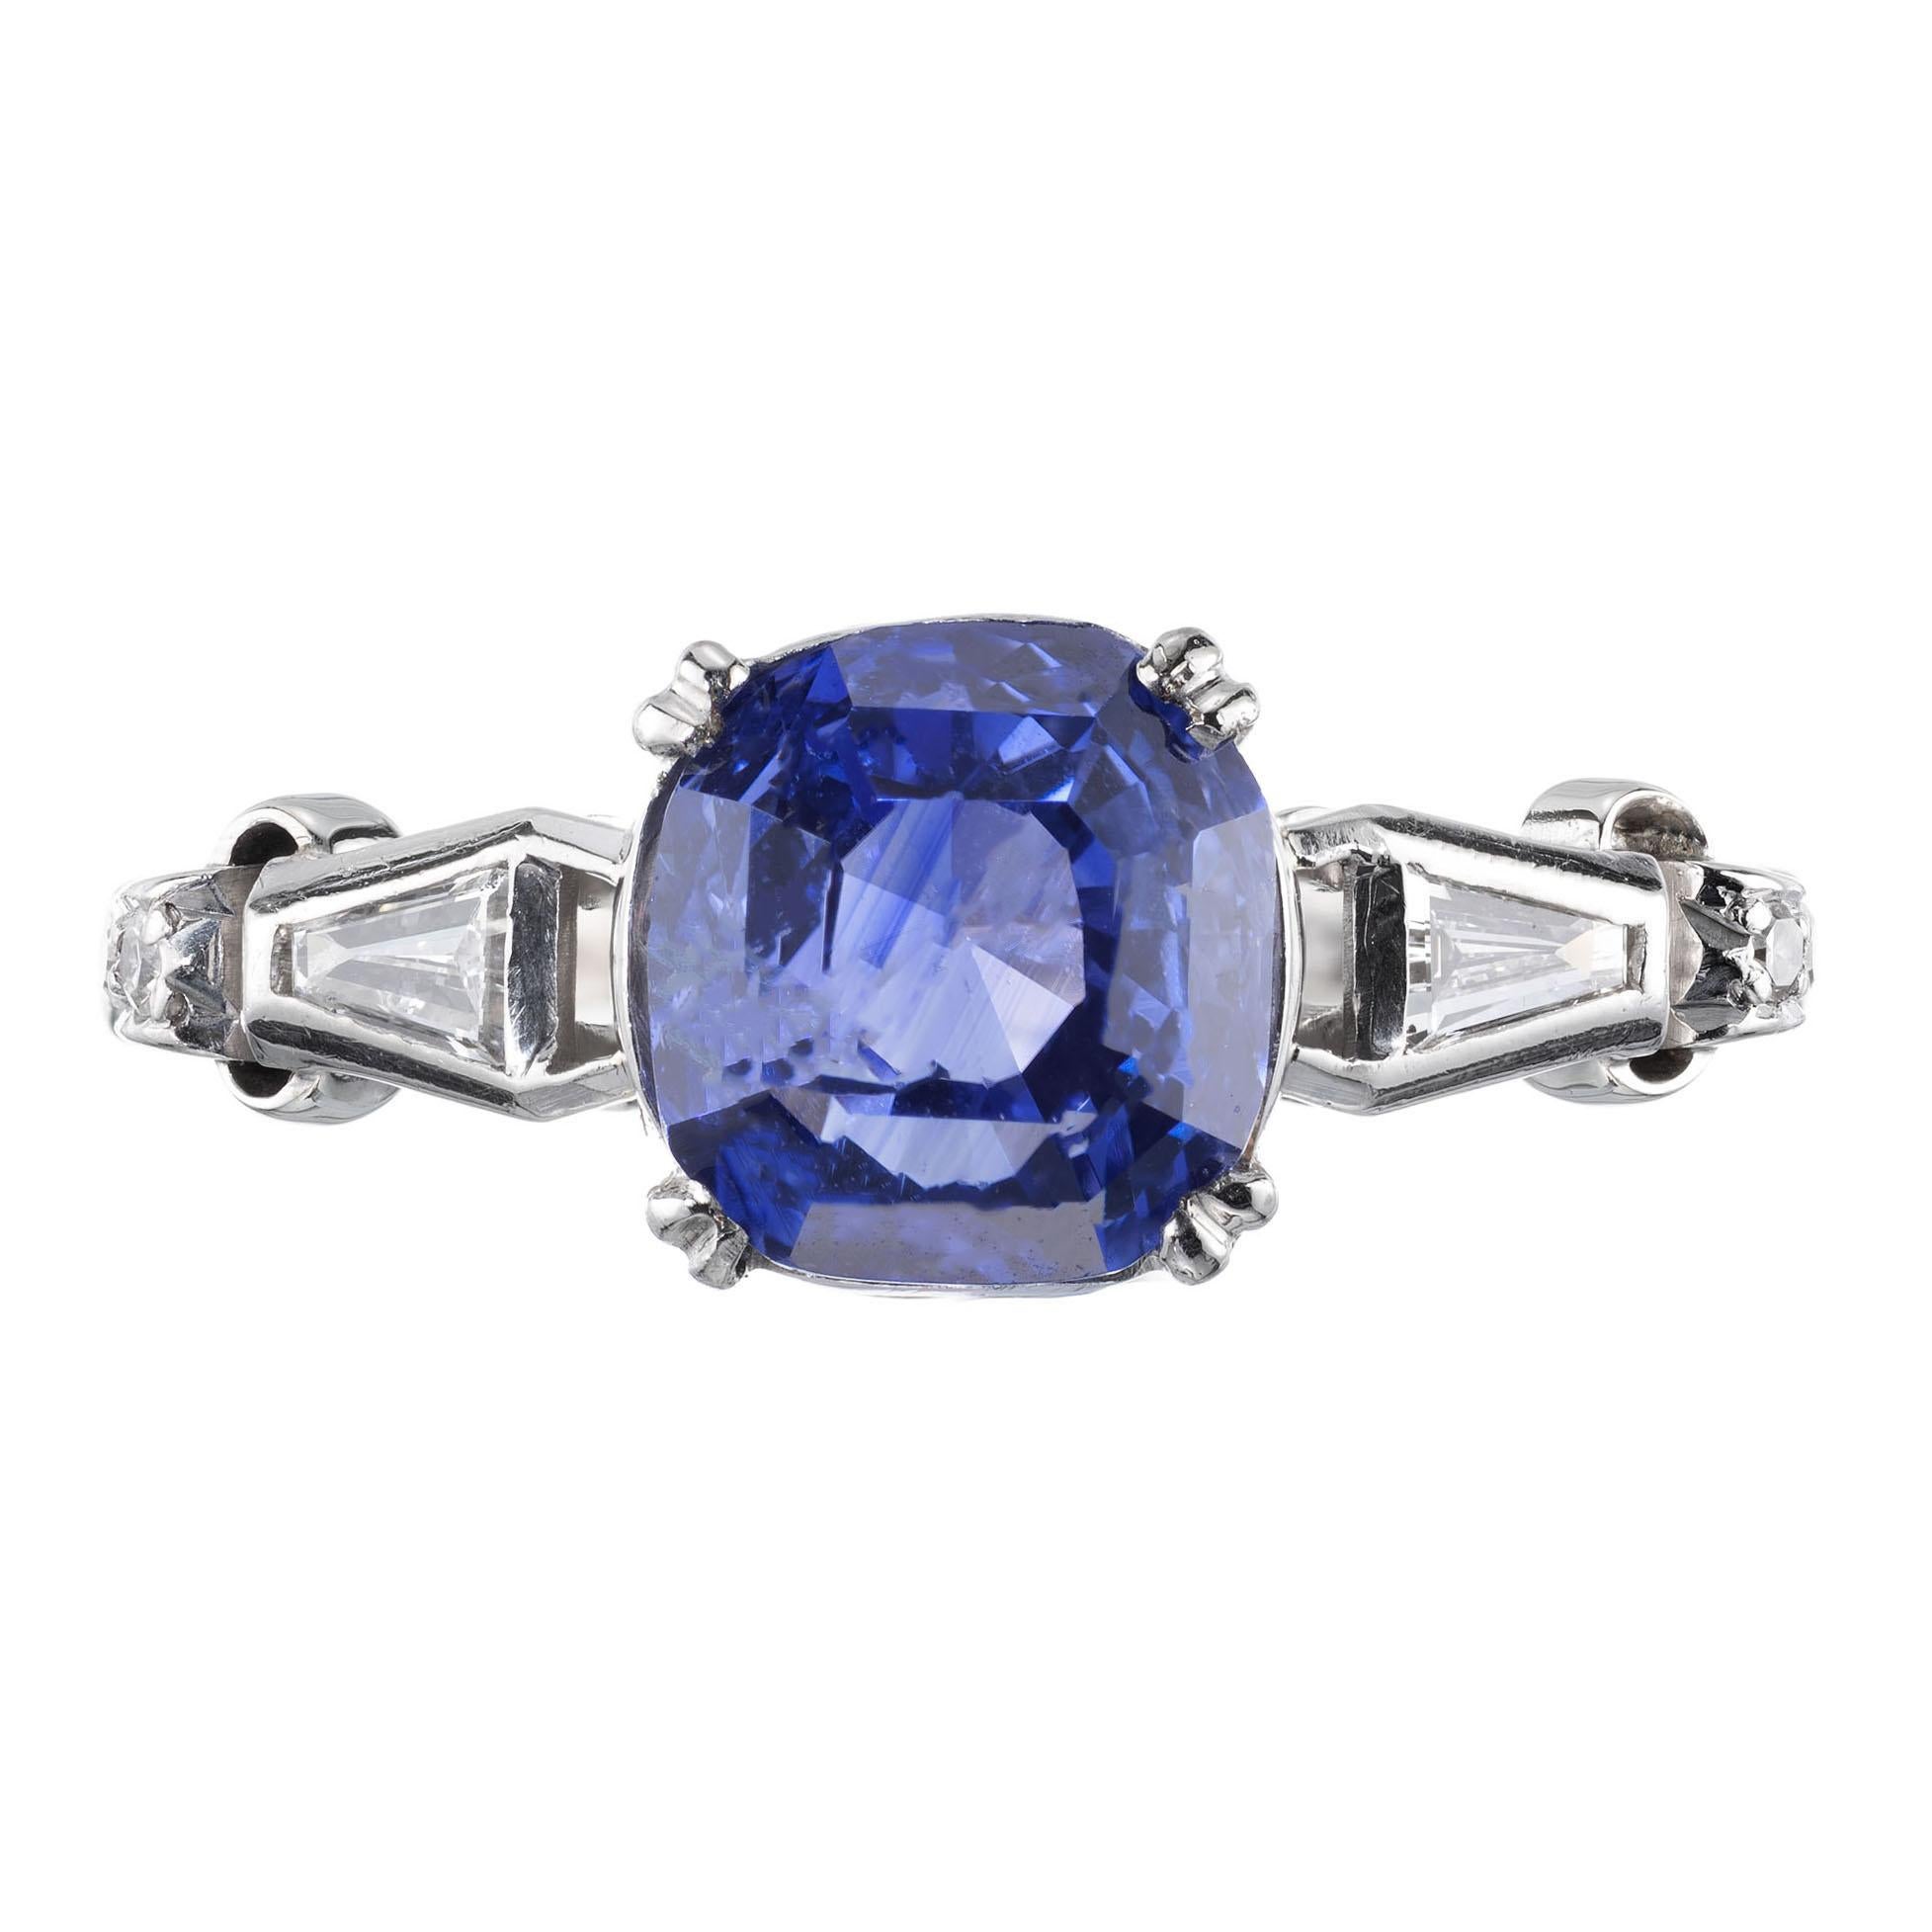 Retro 1940’s sapphire and diamond engagement ring. GIA certified, natural no heat cushion cut center sapphire with two tapered baguette side diamonds and 6 single cut accent diamonds. 18 karat white gold base and palladium top. 

1 cushion cut blue